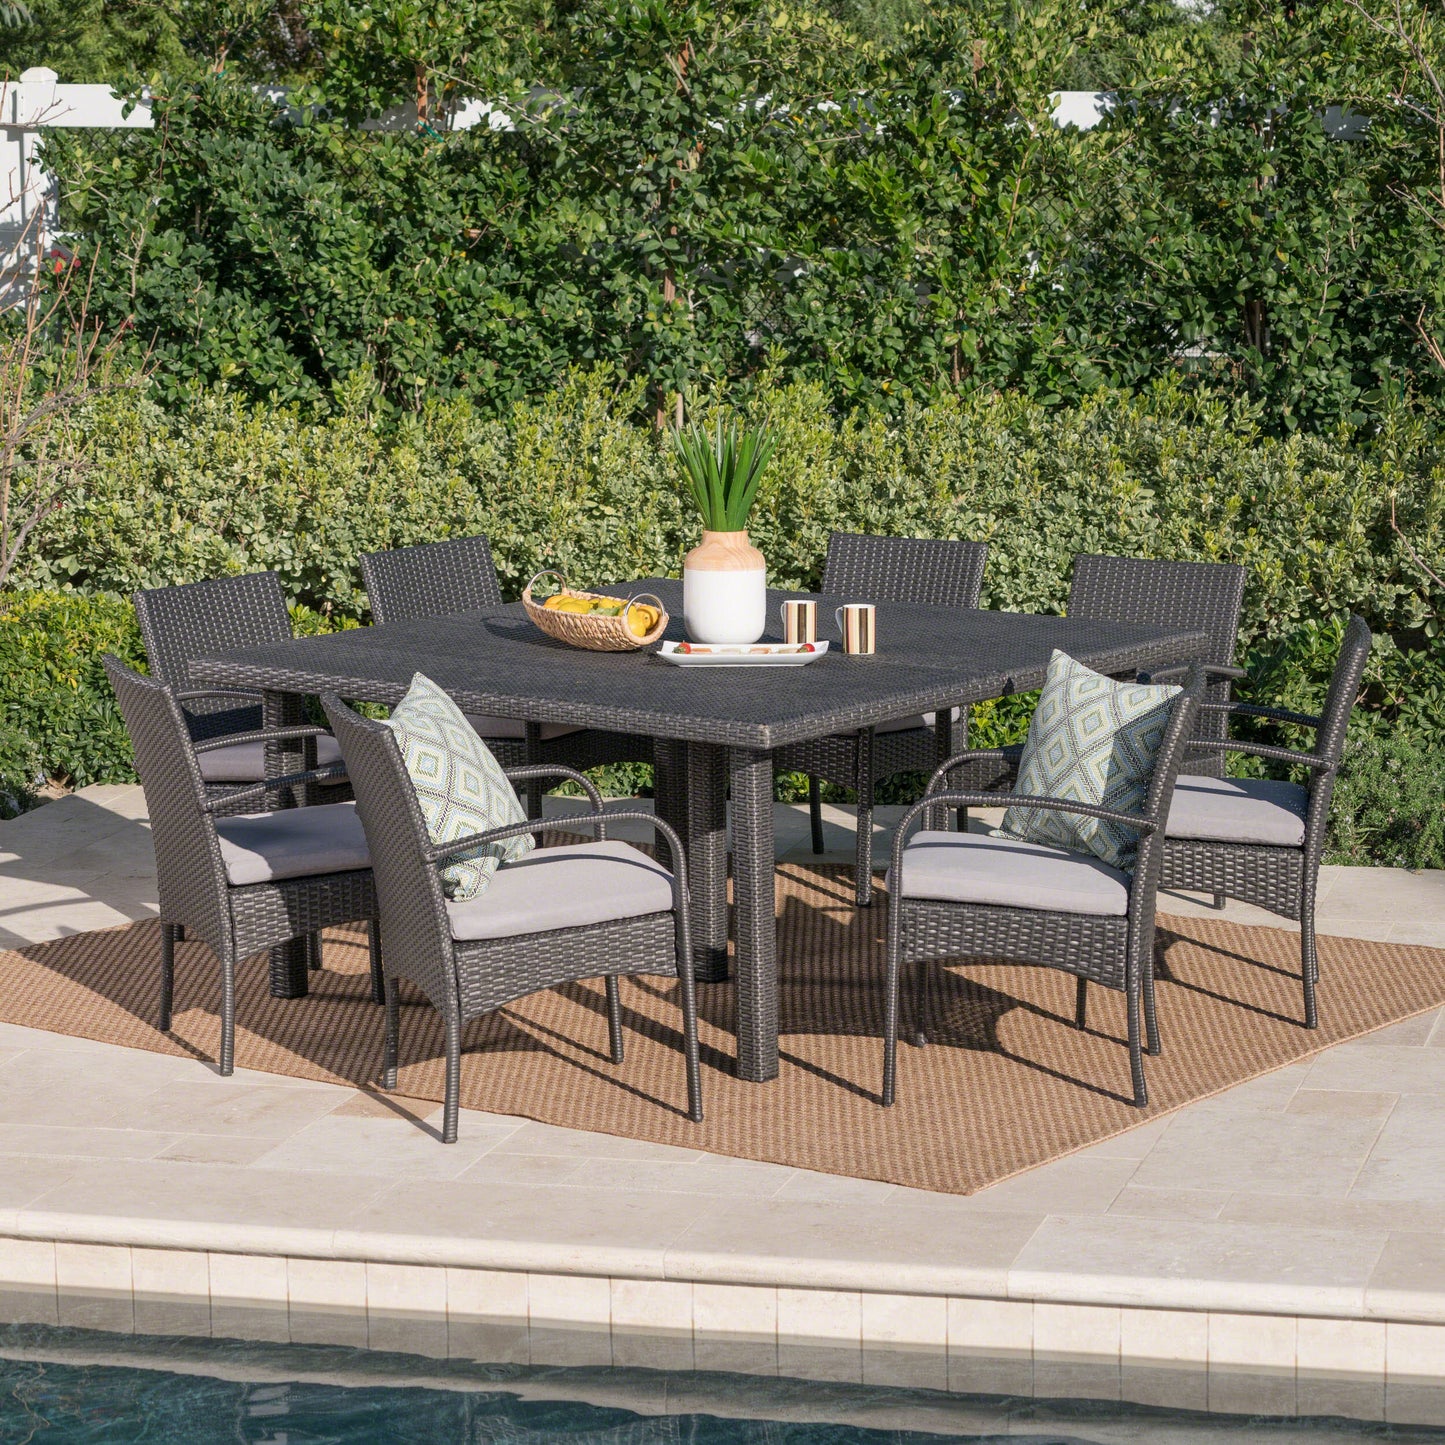 Coral Outdoor 9 Piece Wicker Dining Set with Water Resistant Cushions